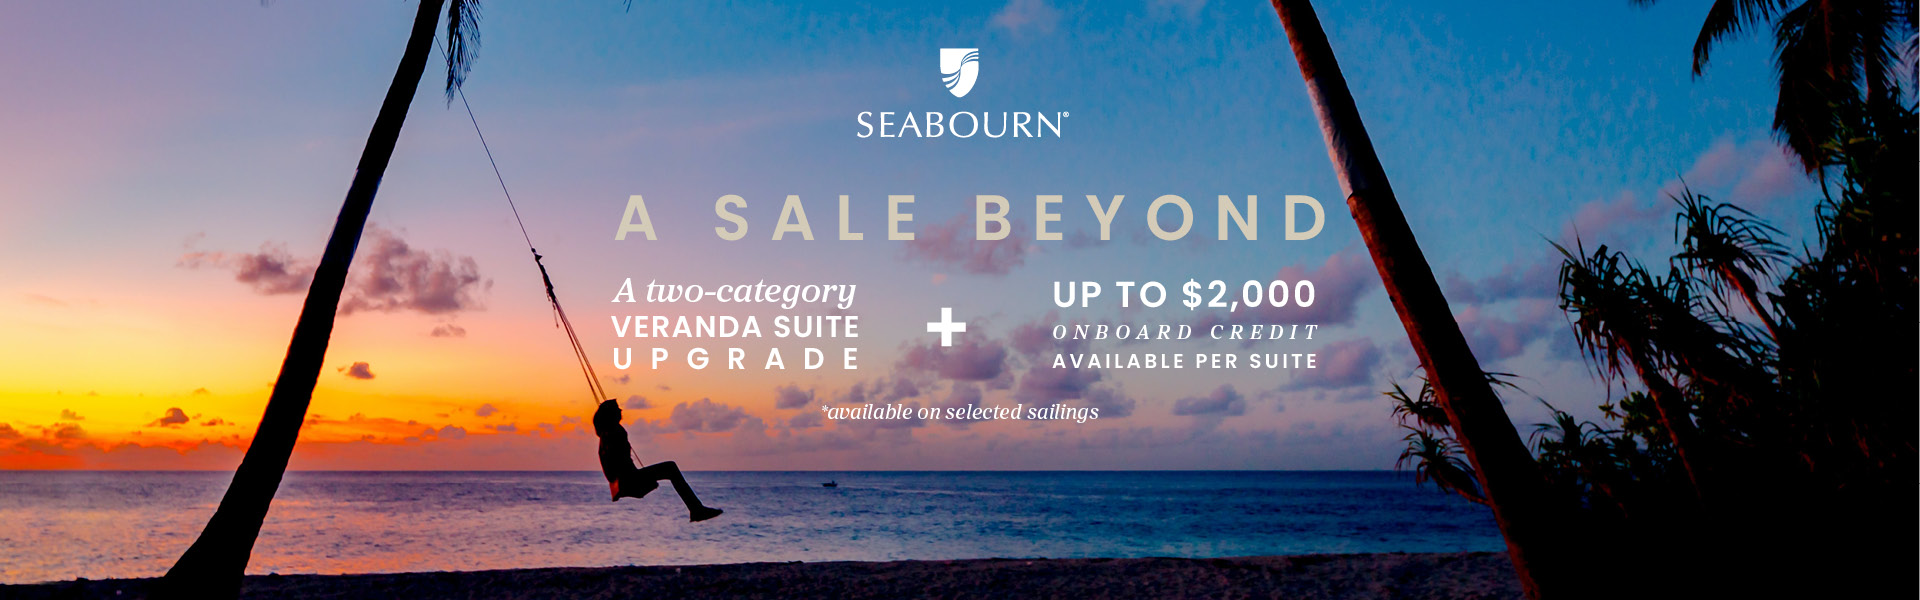 Seabourn Exclusive - A Sale Beyond